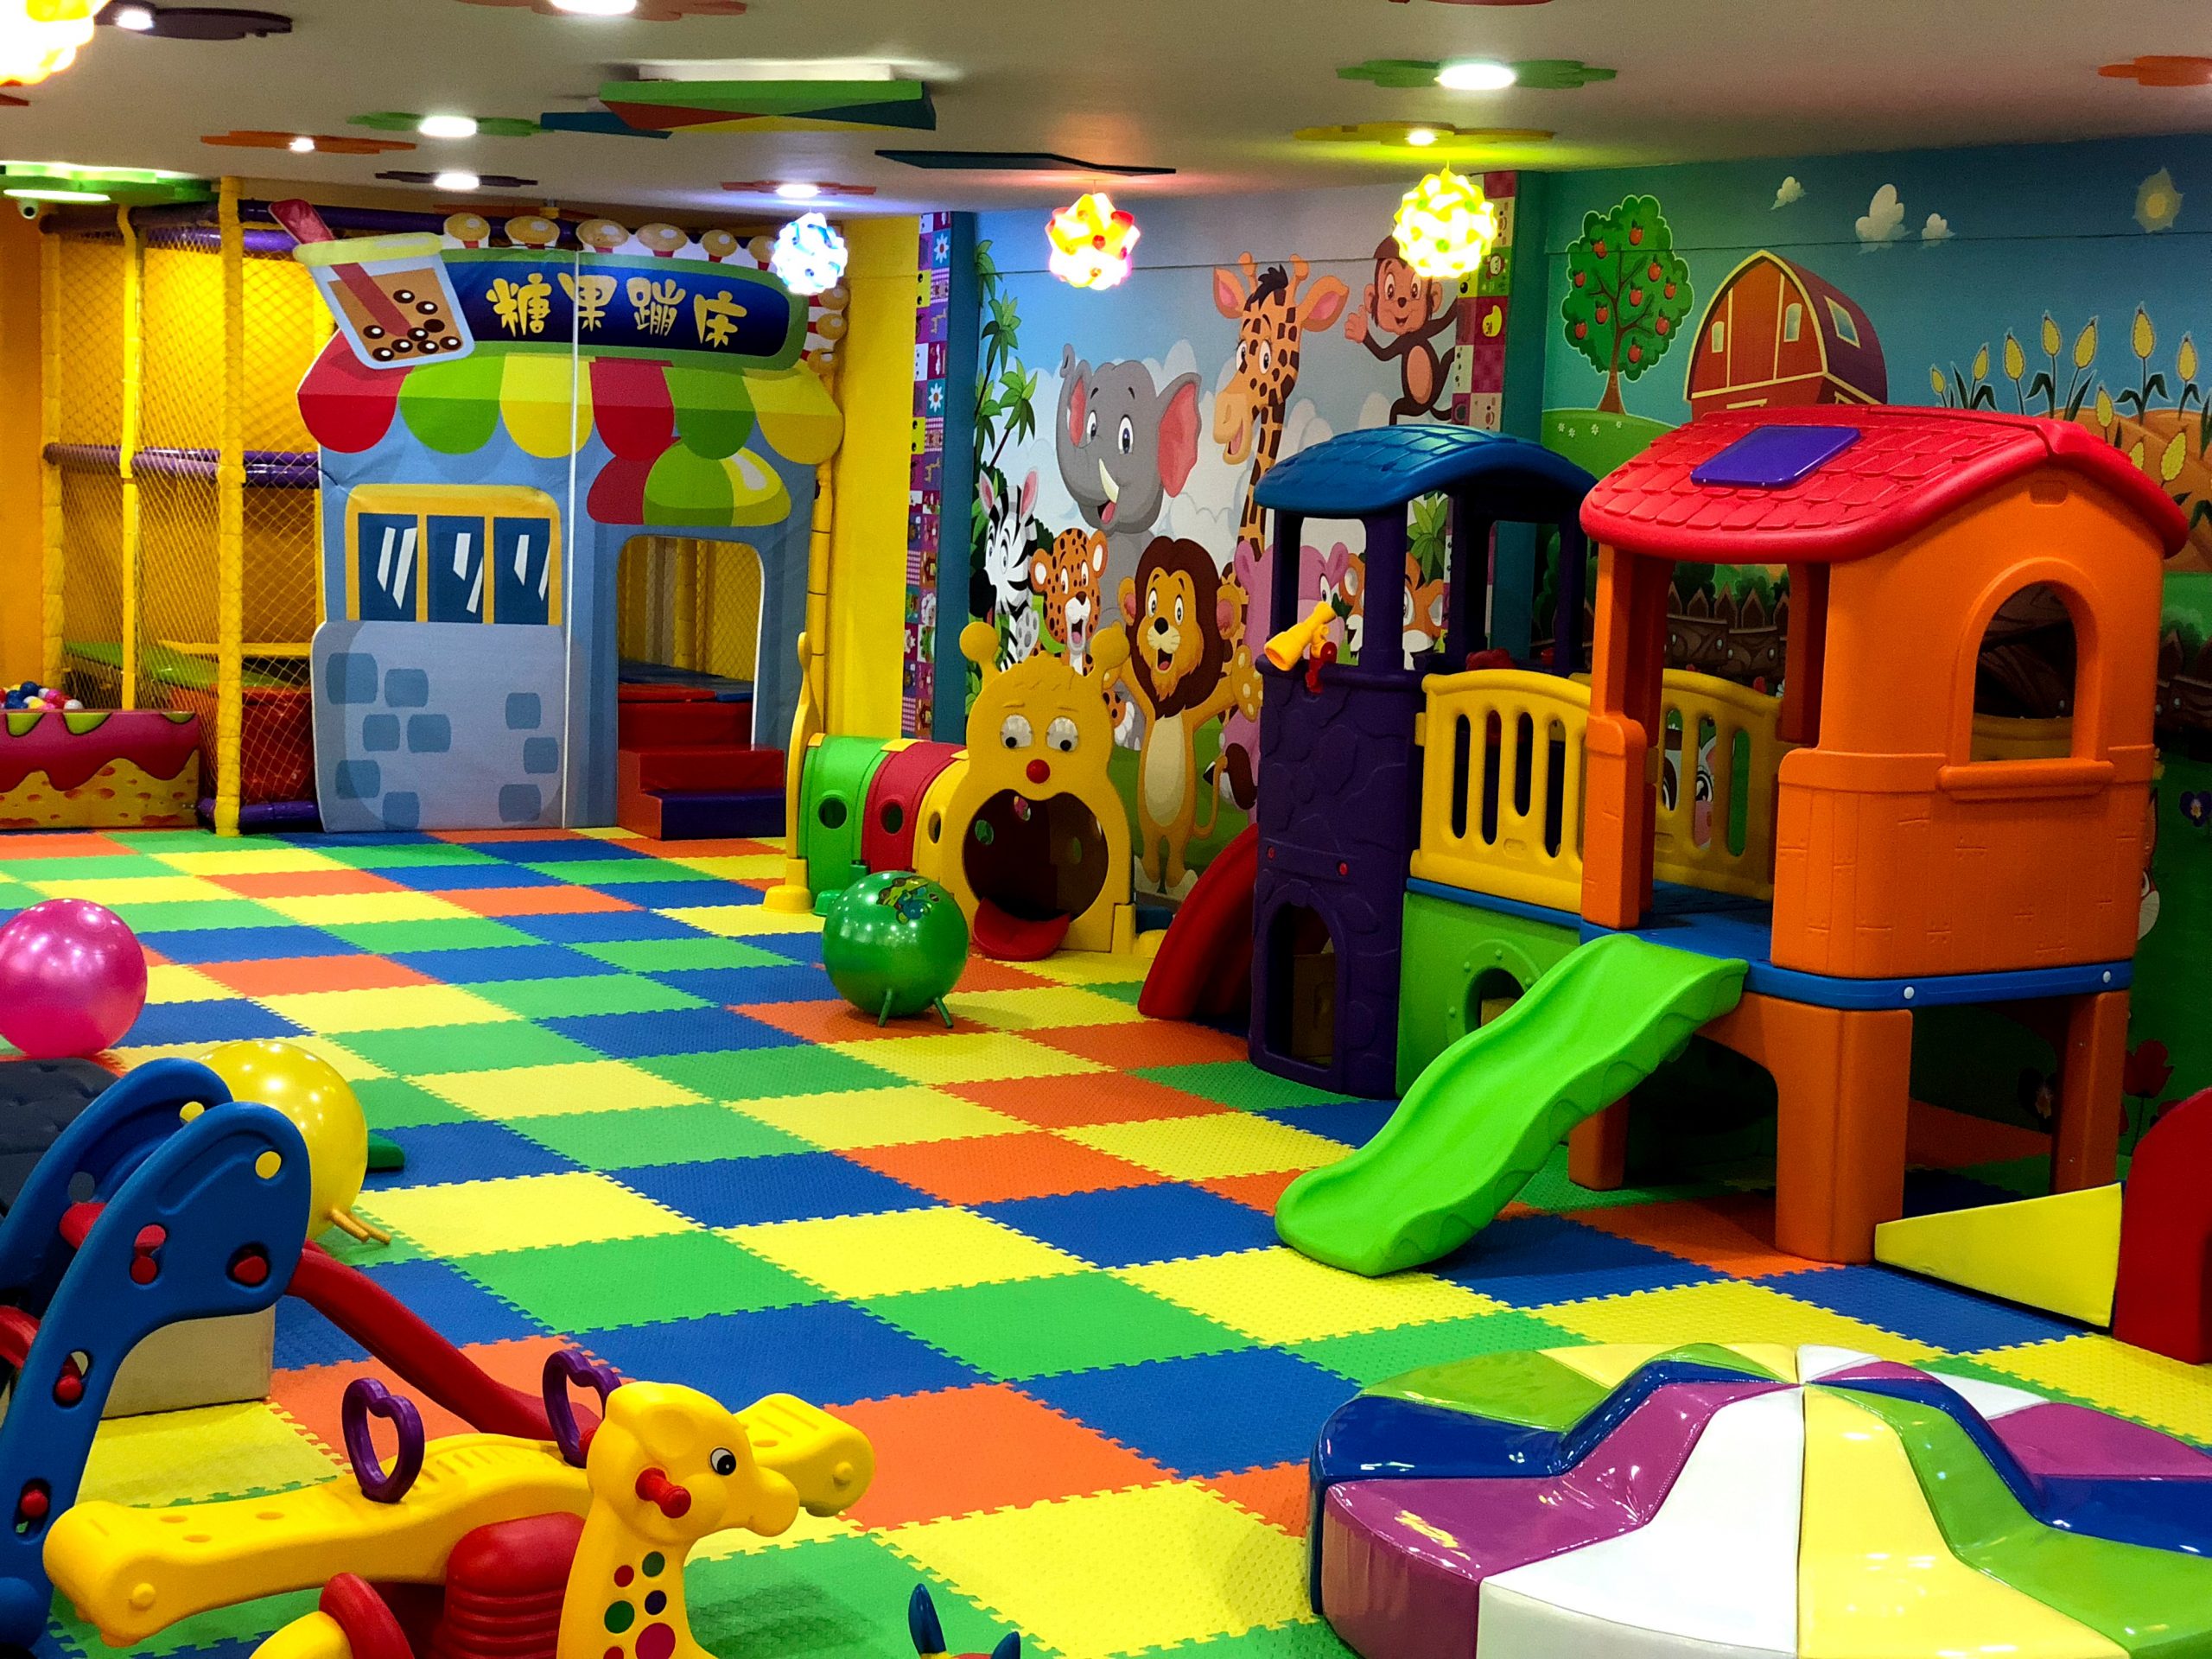 Soft Play Area Equipment Suppliers With Global Impact and Social Initiatives